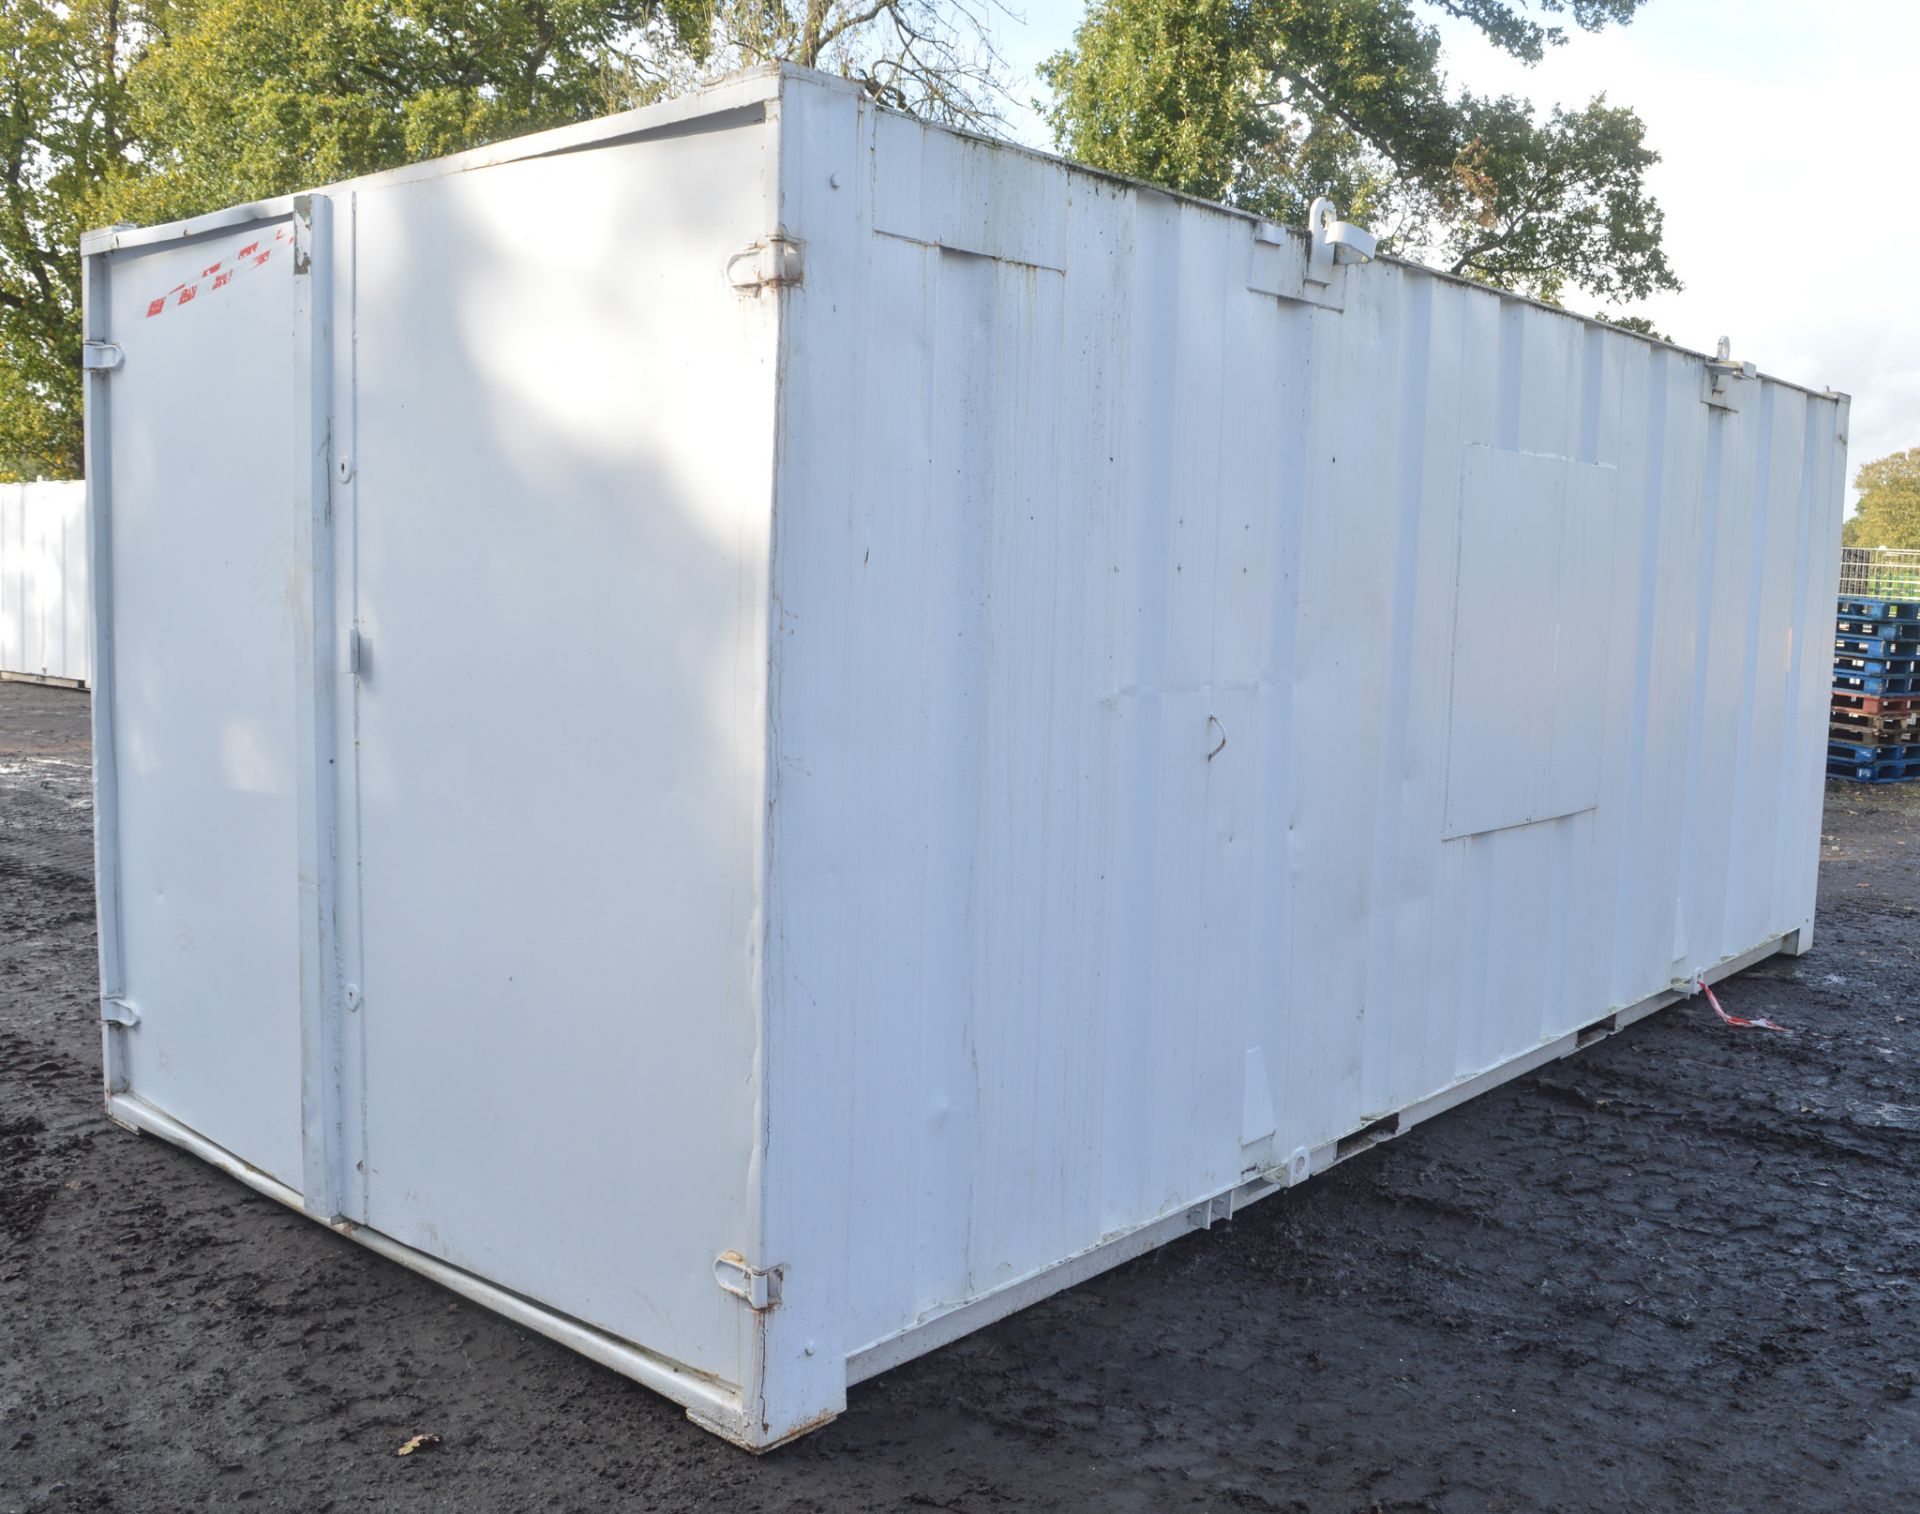 21 ft x 9 ft steel anti vandal shipping container  c/w keys in office  A508242